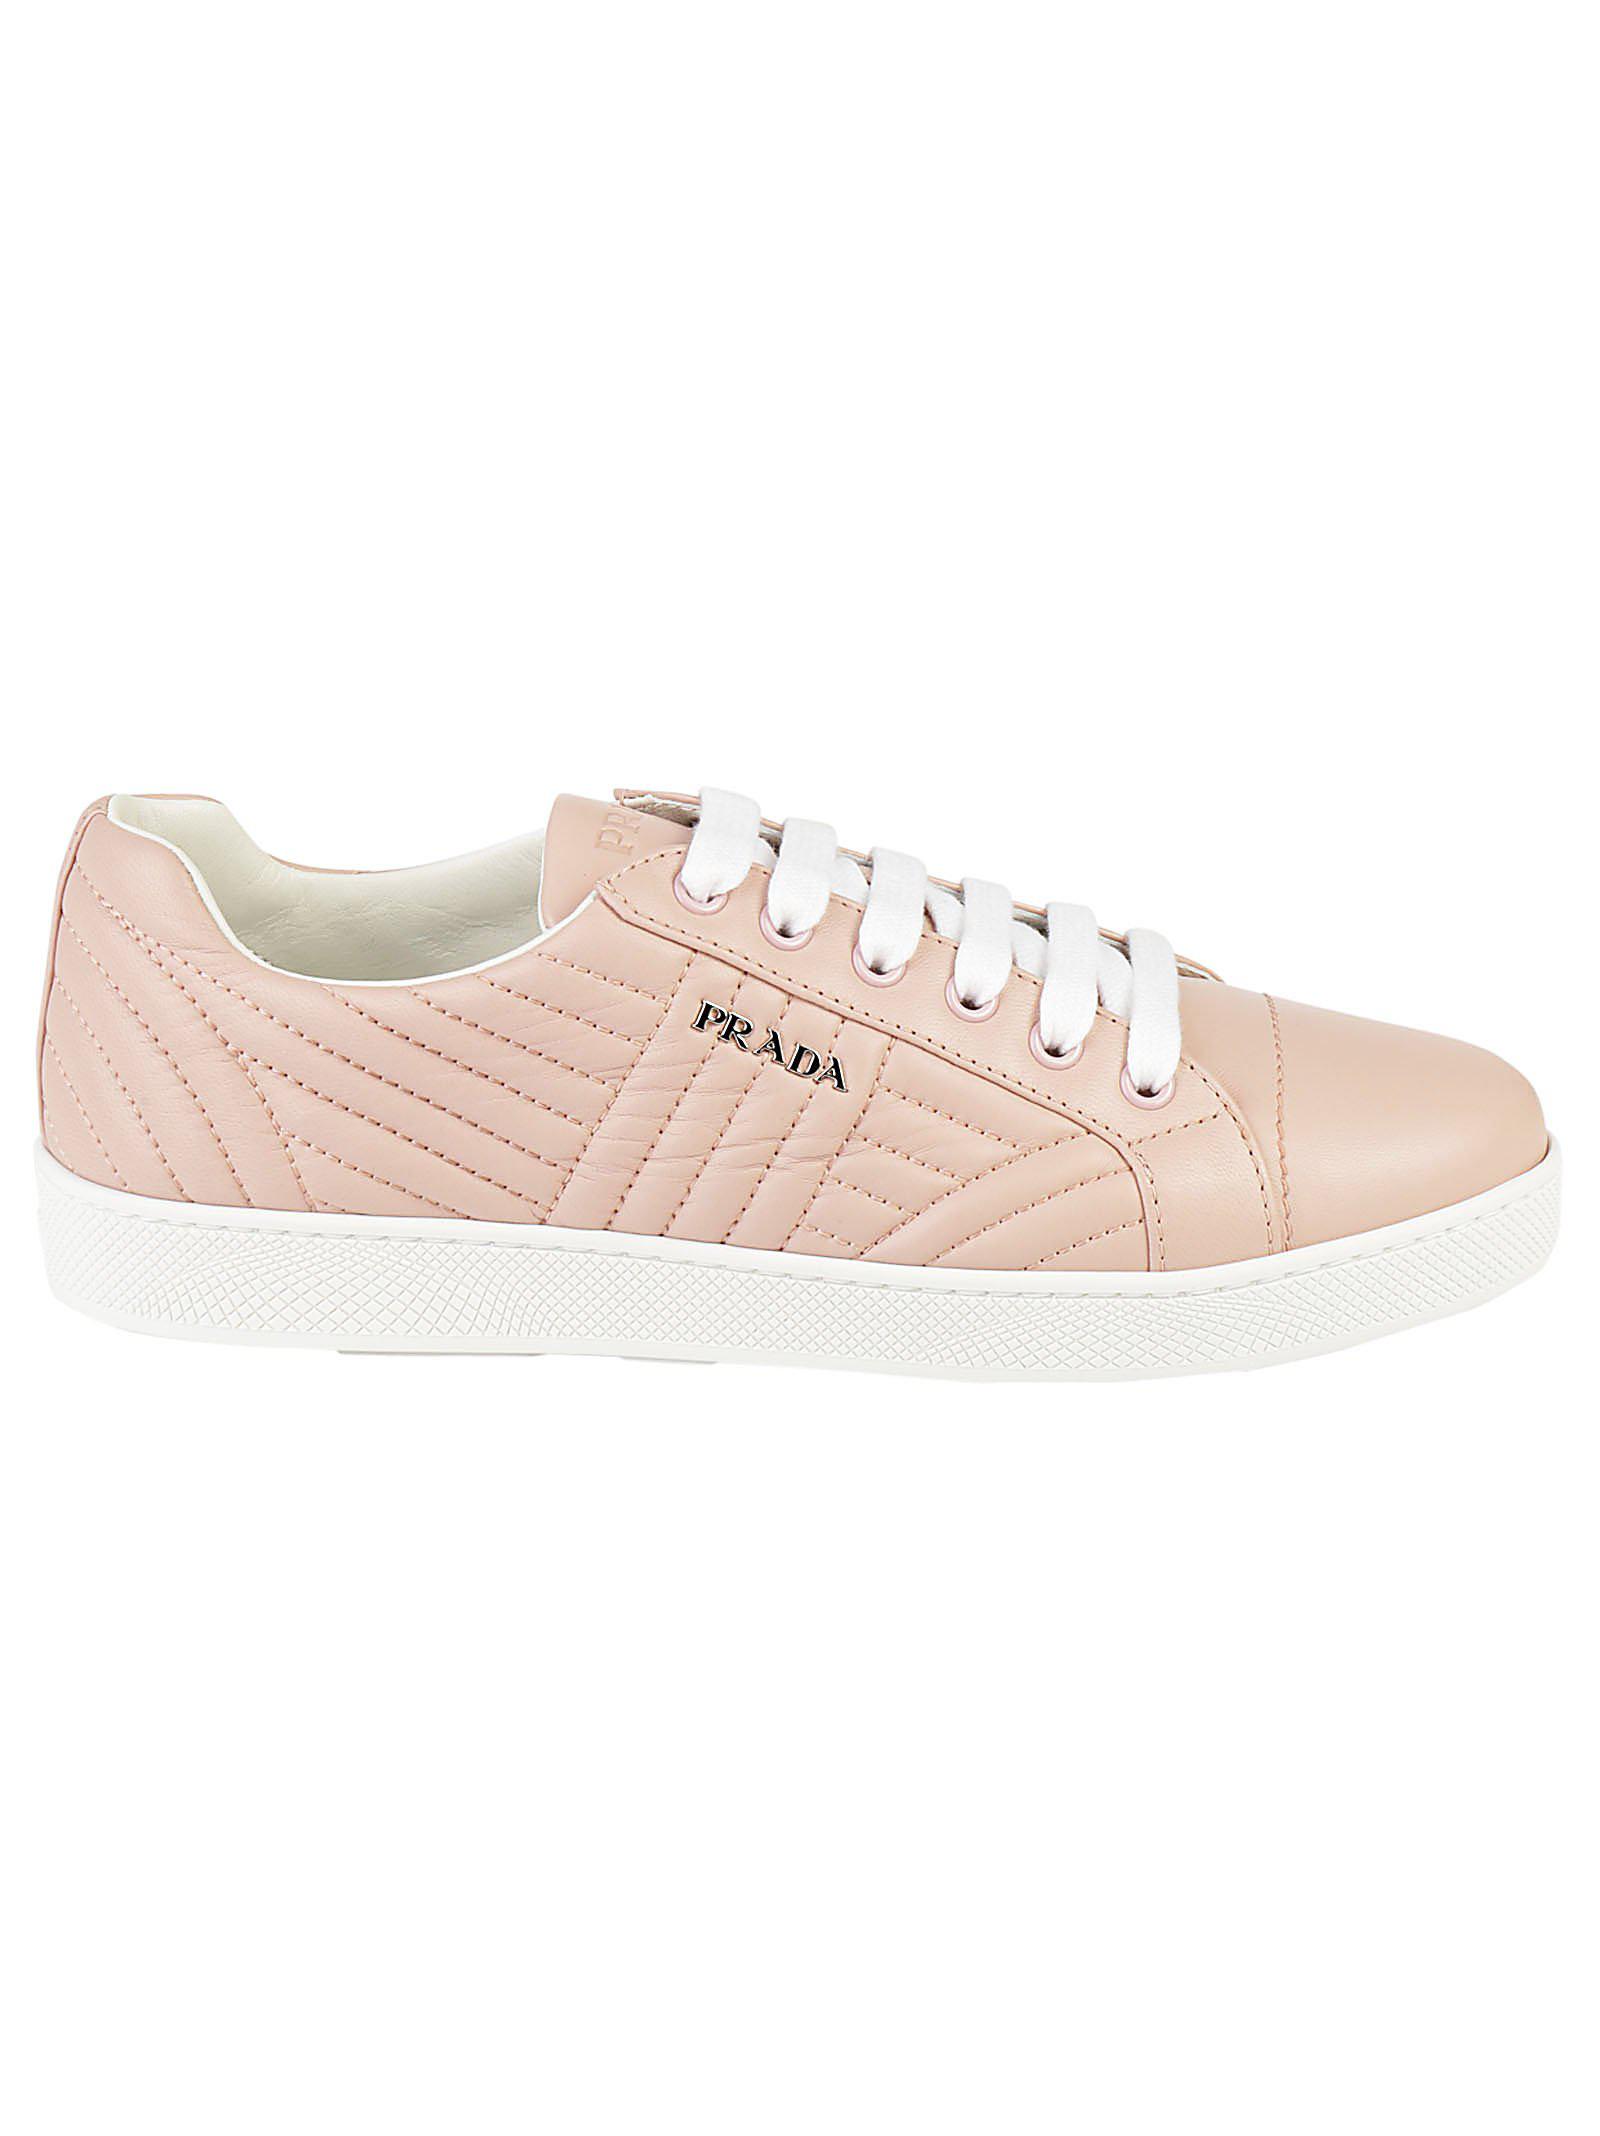 prada quilted leather sneaker